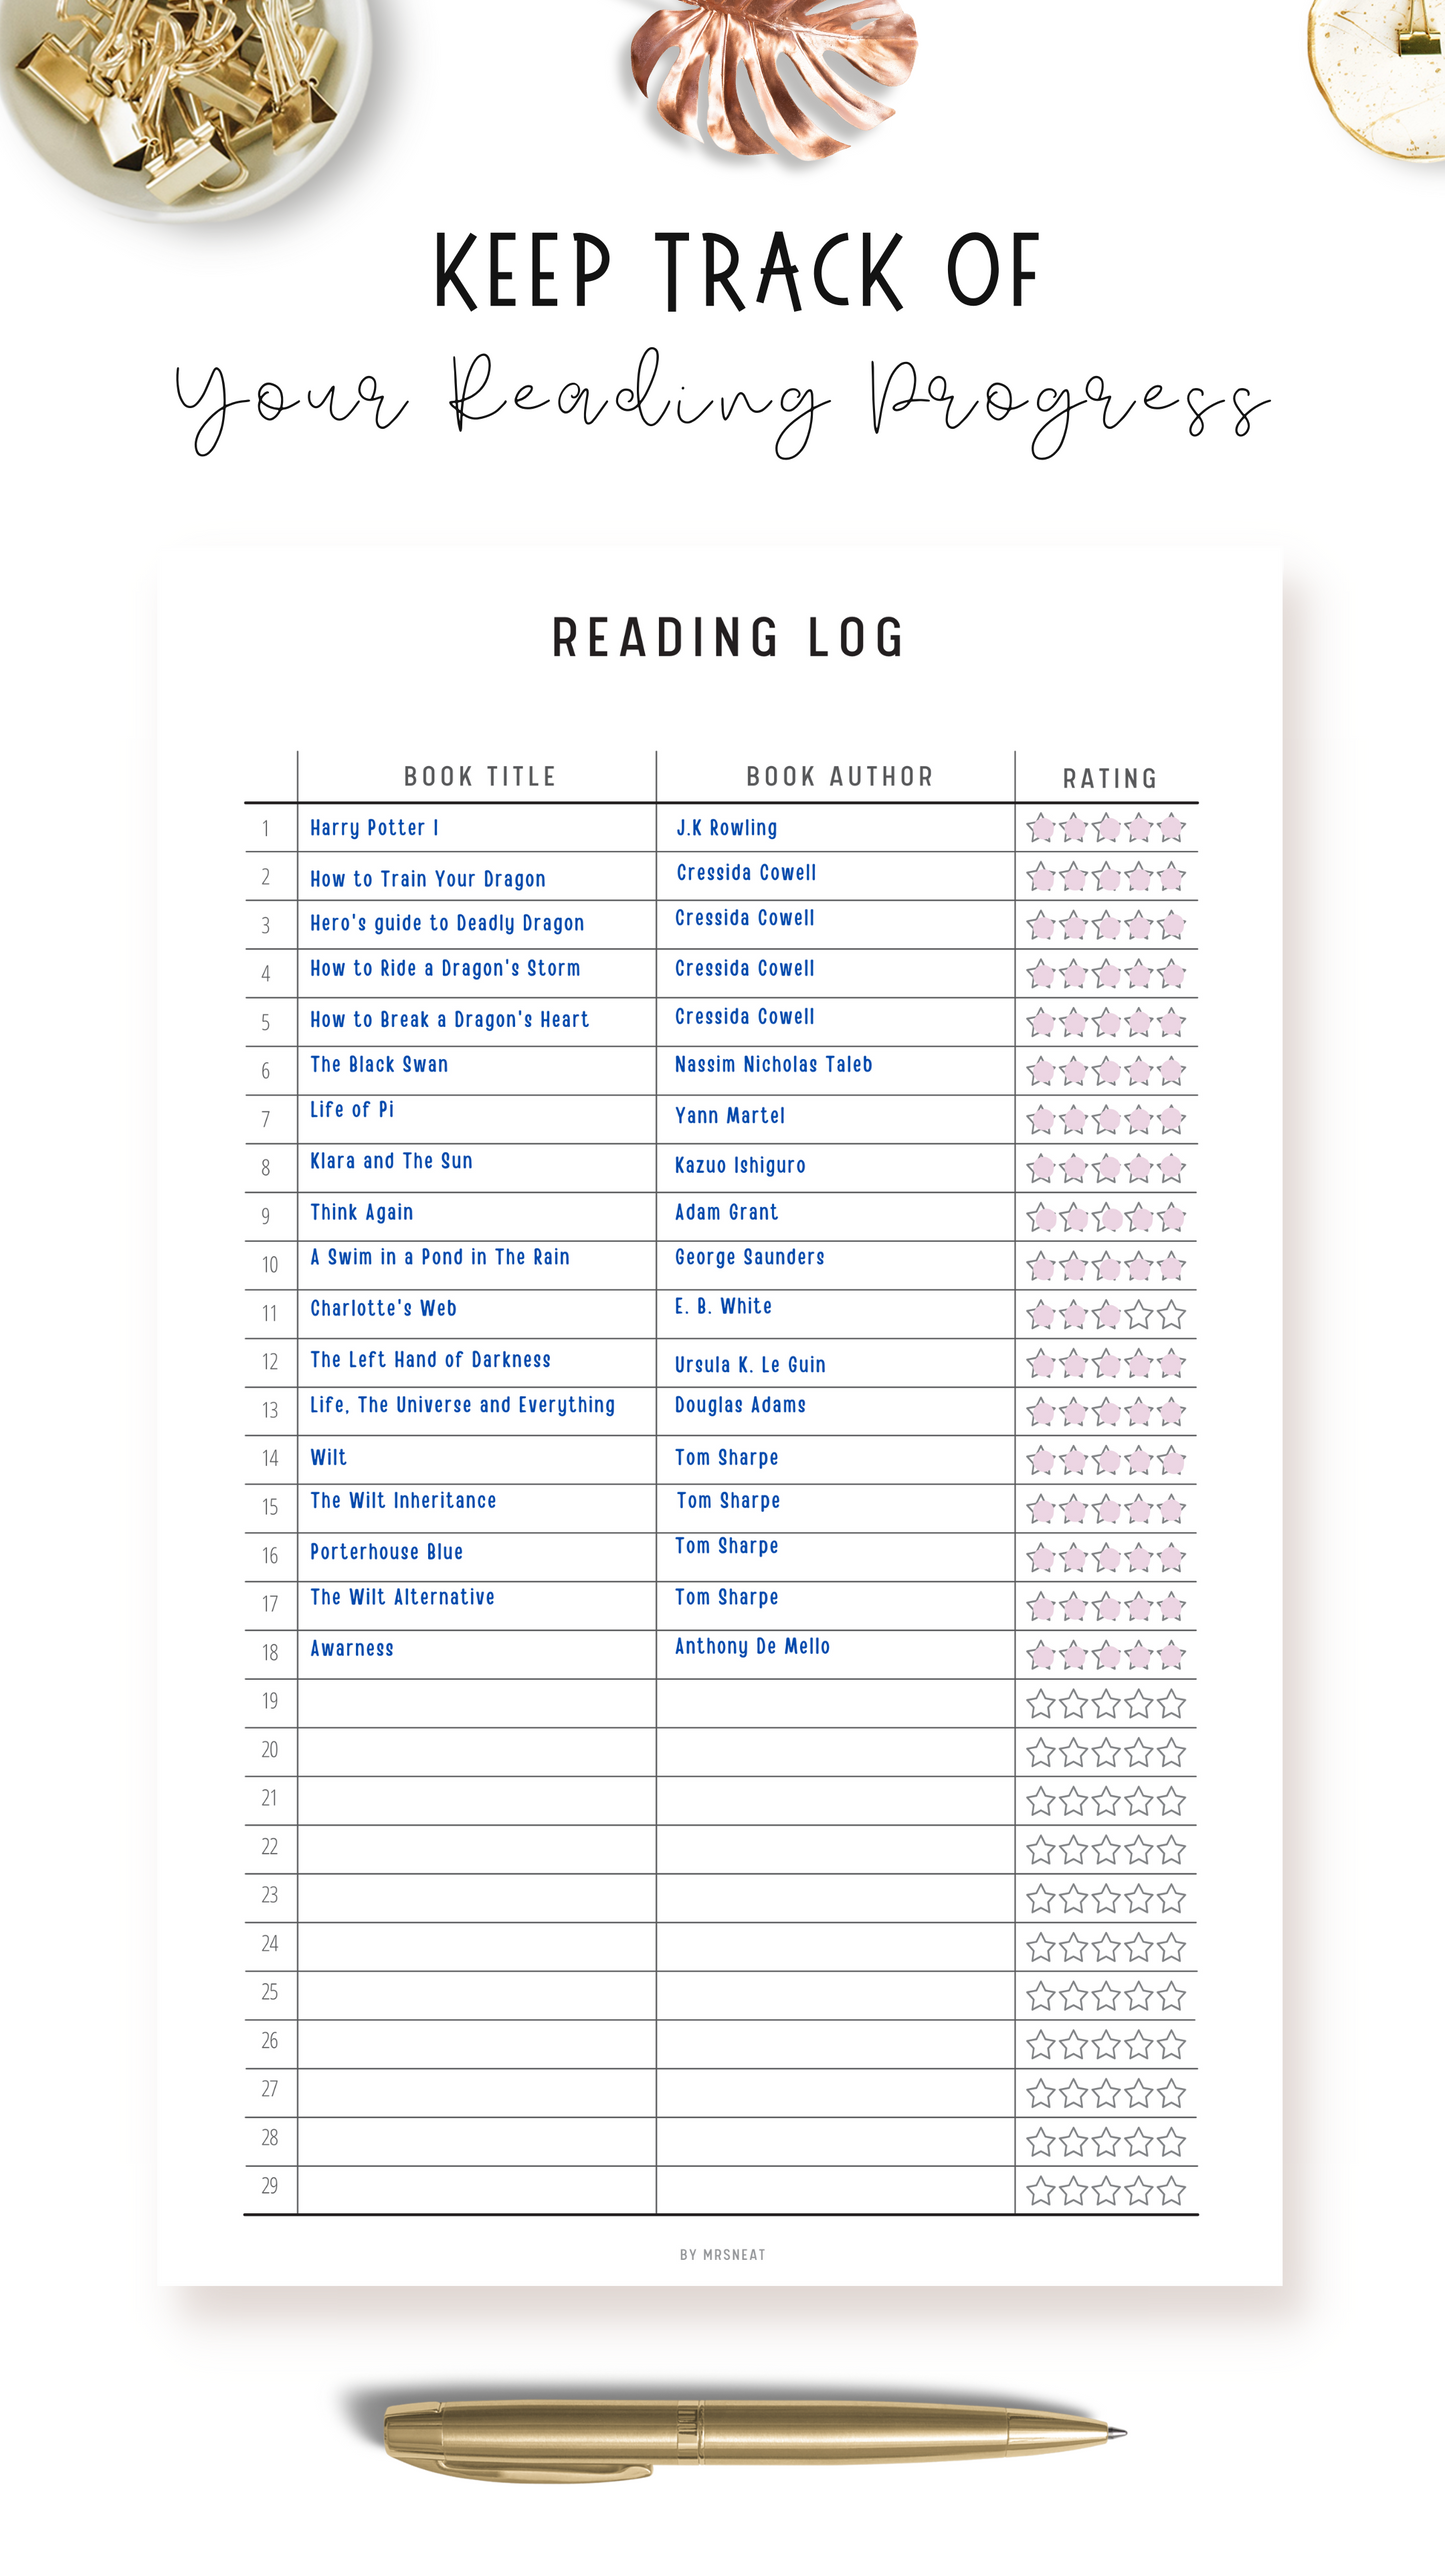 Clean and beautiful reading log with minimalist design to track of reading progress